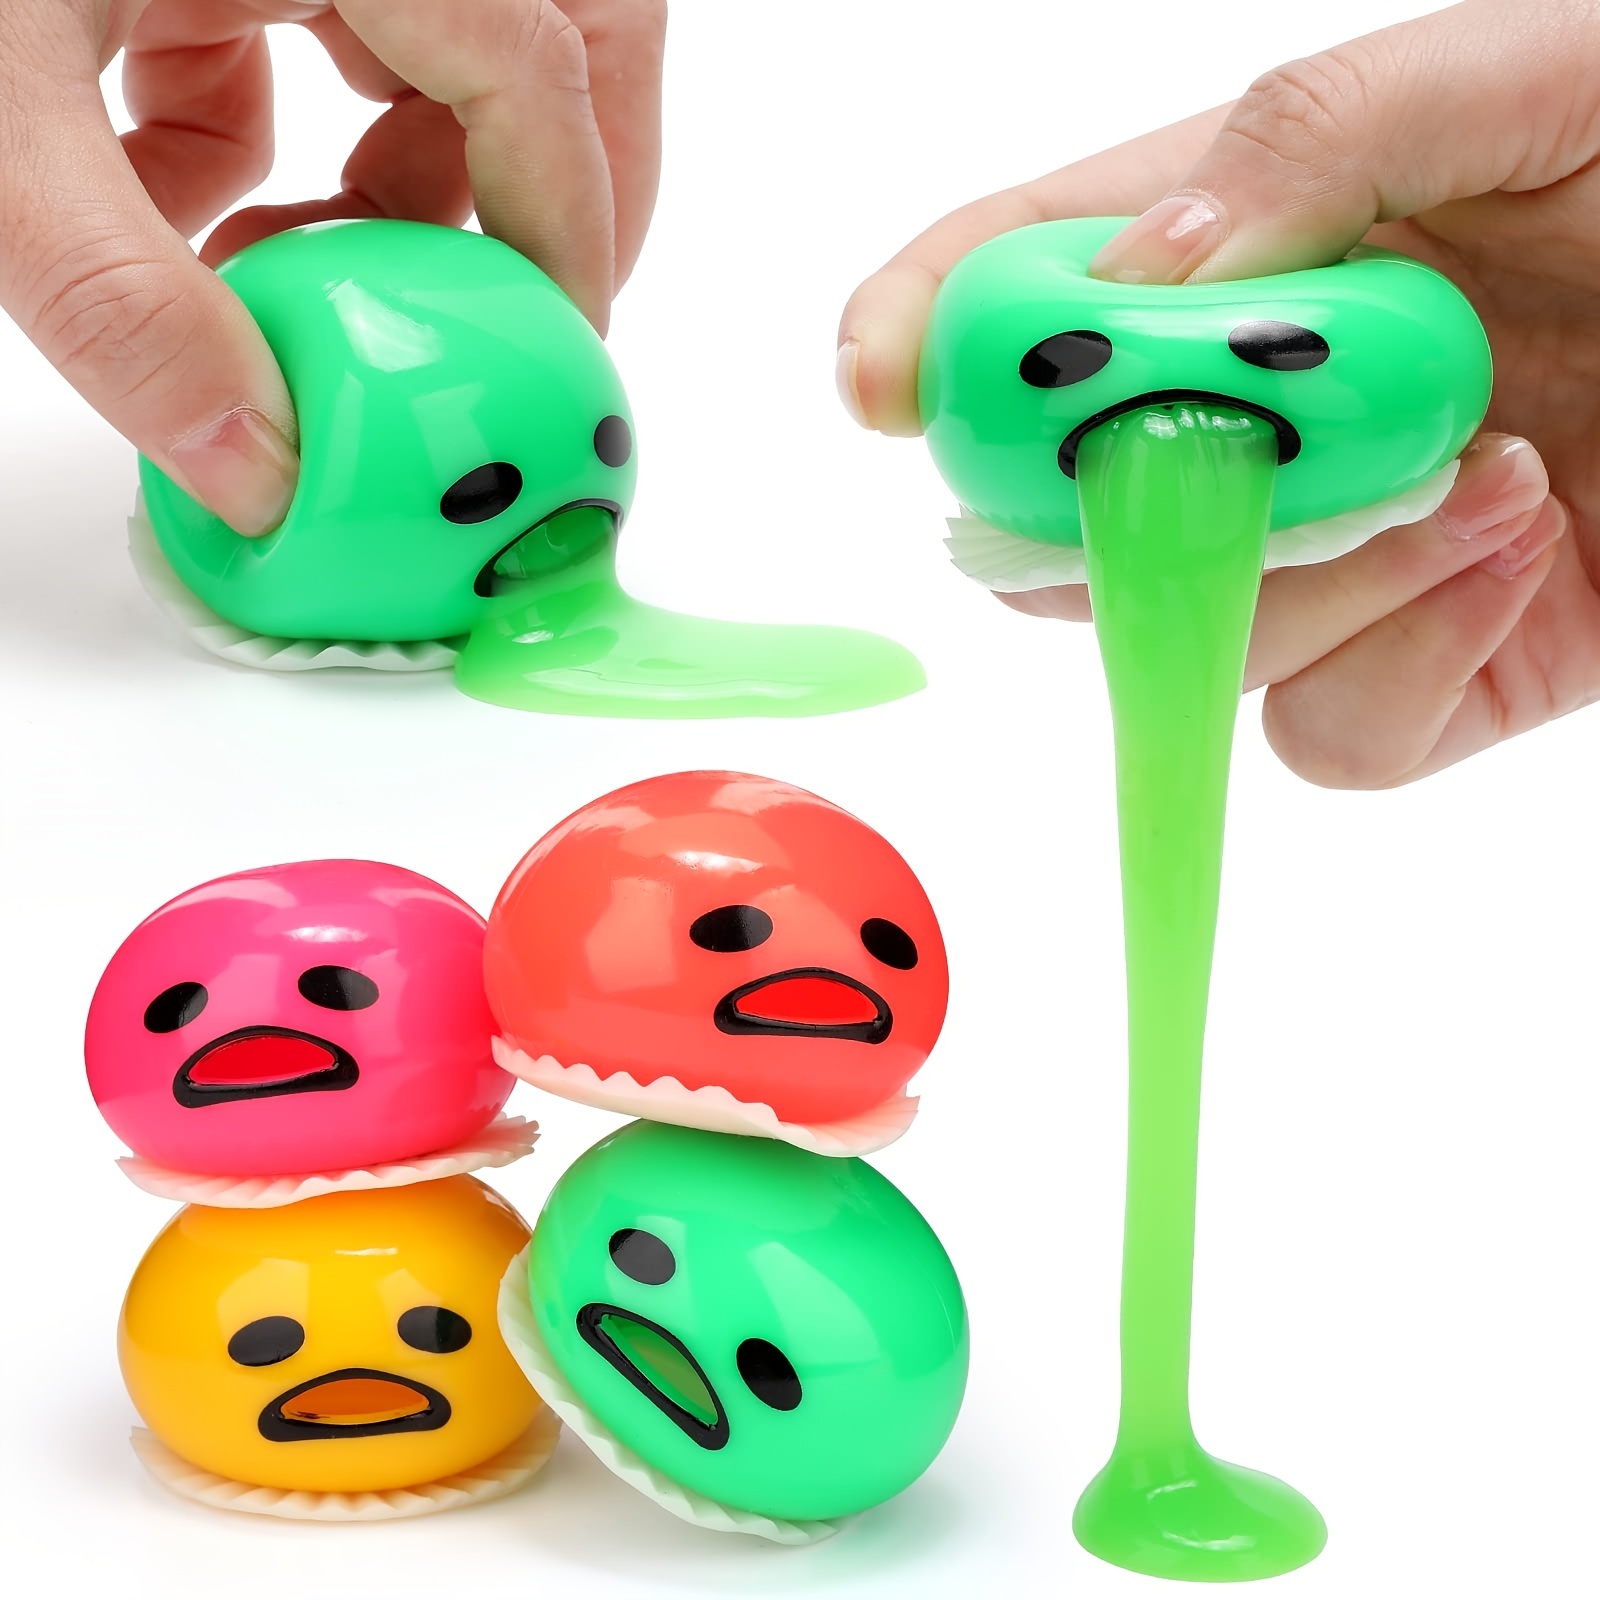 Vomiting Stress Ball, Egg Yolk Slime Ball Prank Toy, Cute Lazy Vomiting  Sucking Ball, Funny Stress Relief Fidget Toys Gag Gifts (4 PCS & 4 Colors)